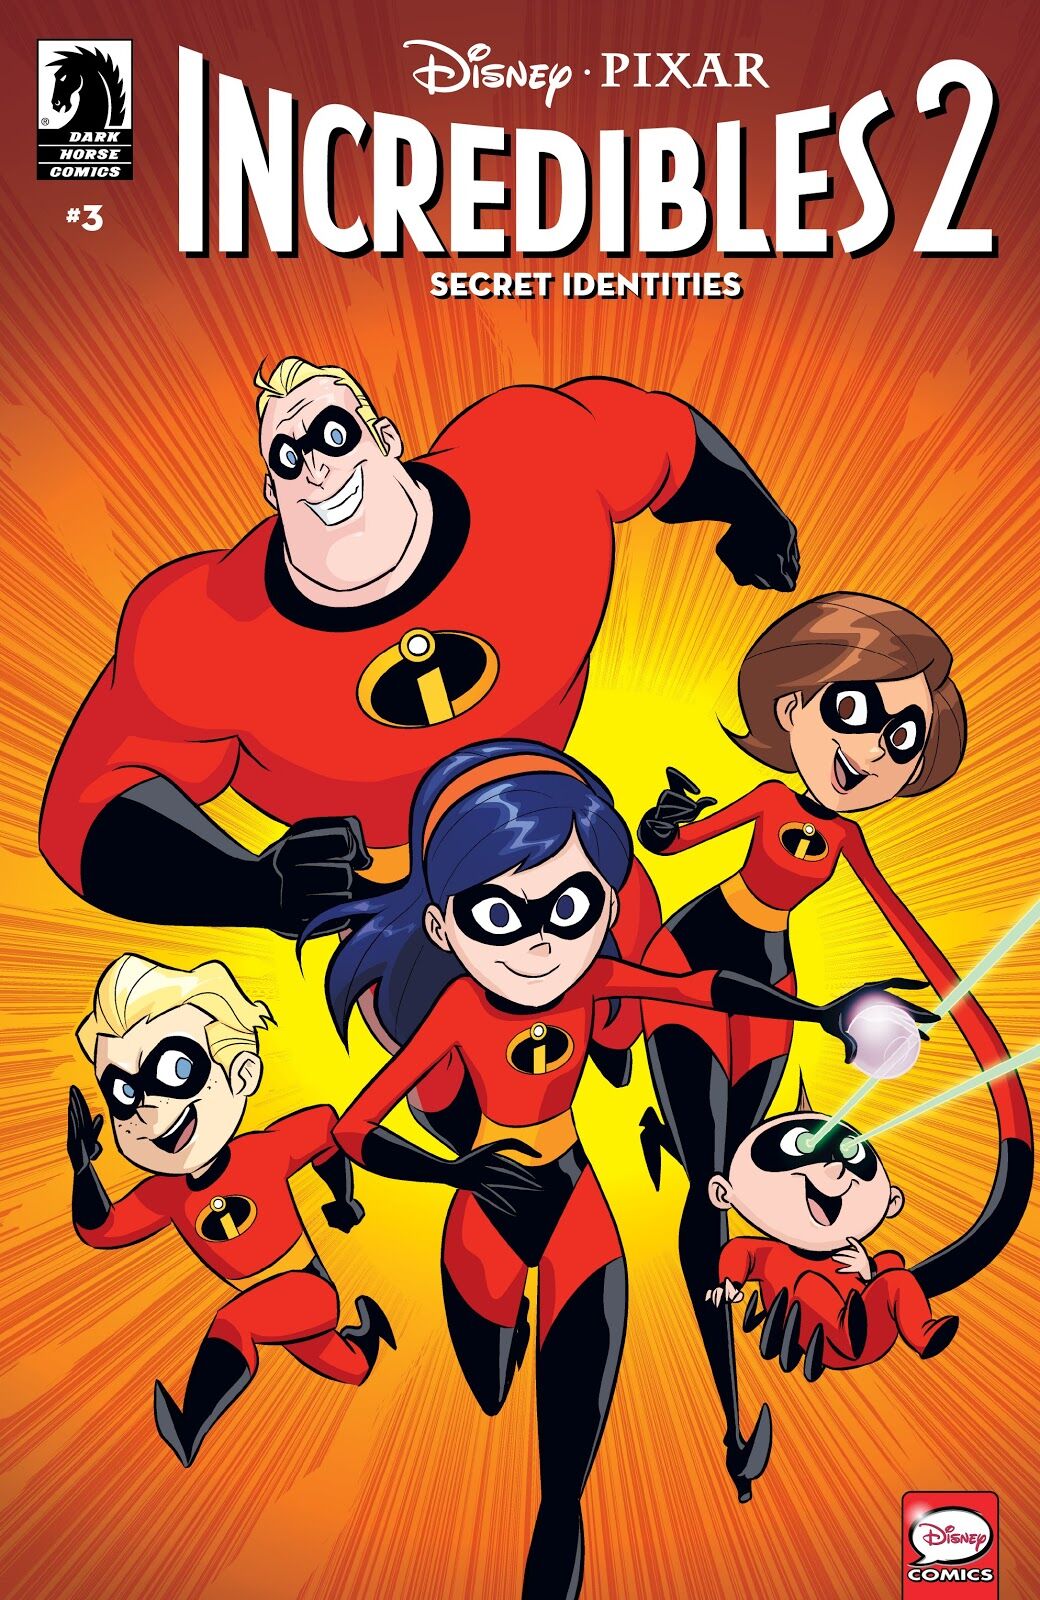 https://static.wikia.nocookie.net/the-incredibles/images/3/3b/S3.jpg/revision/latest/scale-to-width-down/1040?cb=20191204033255